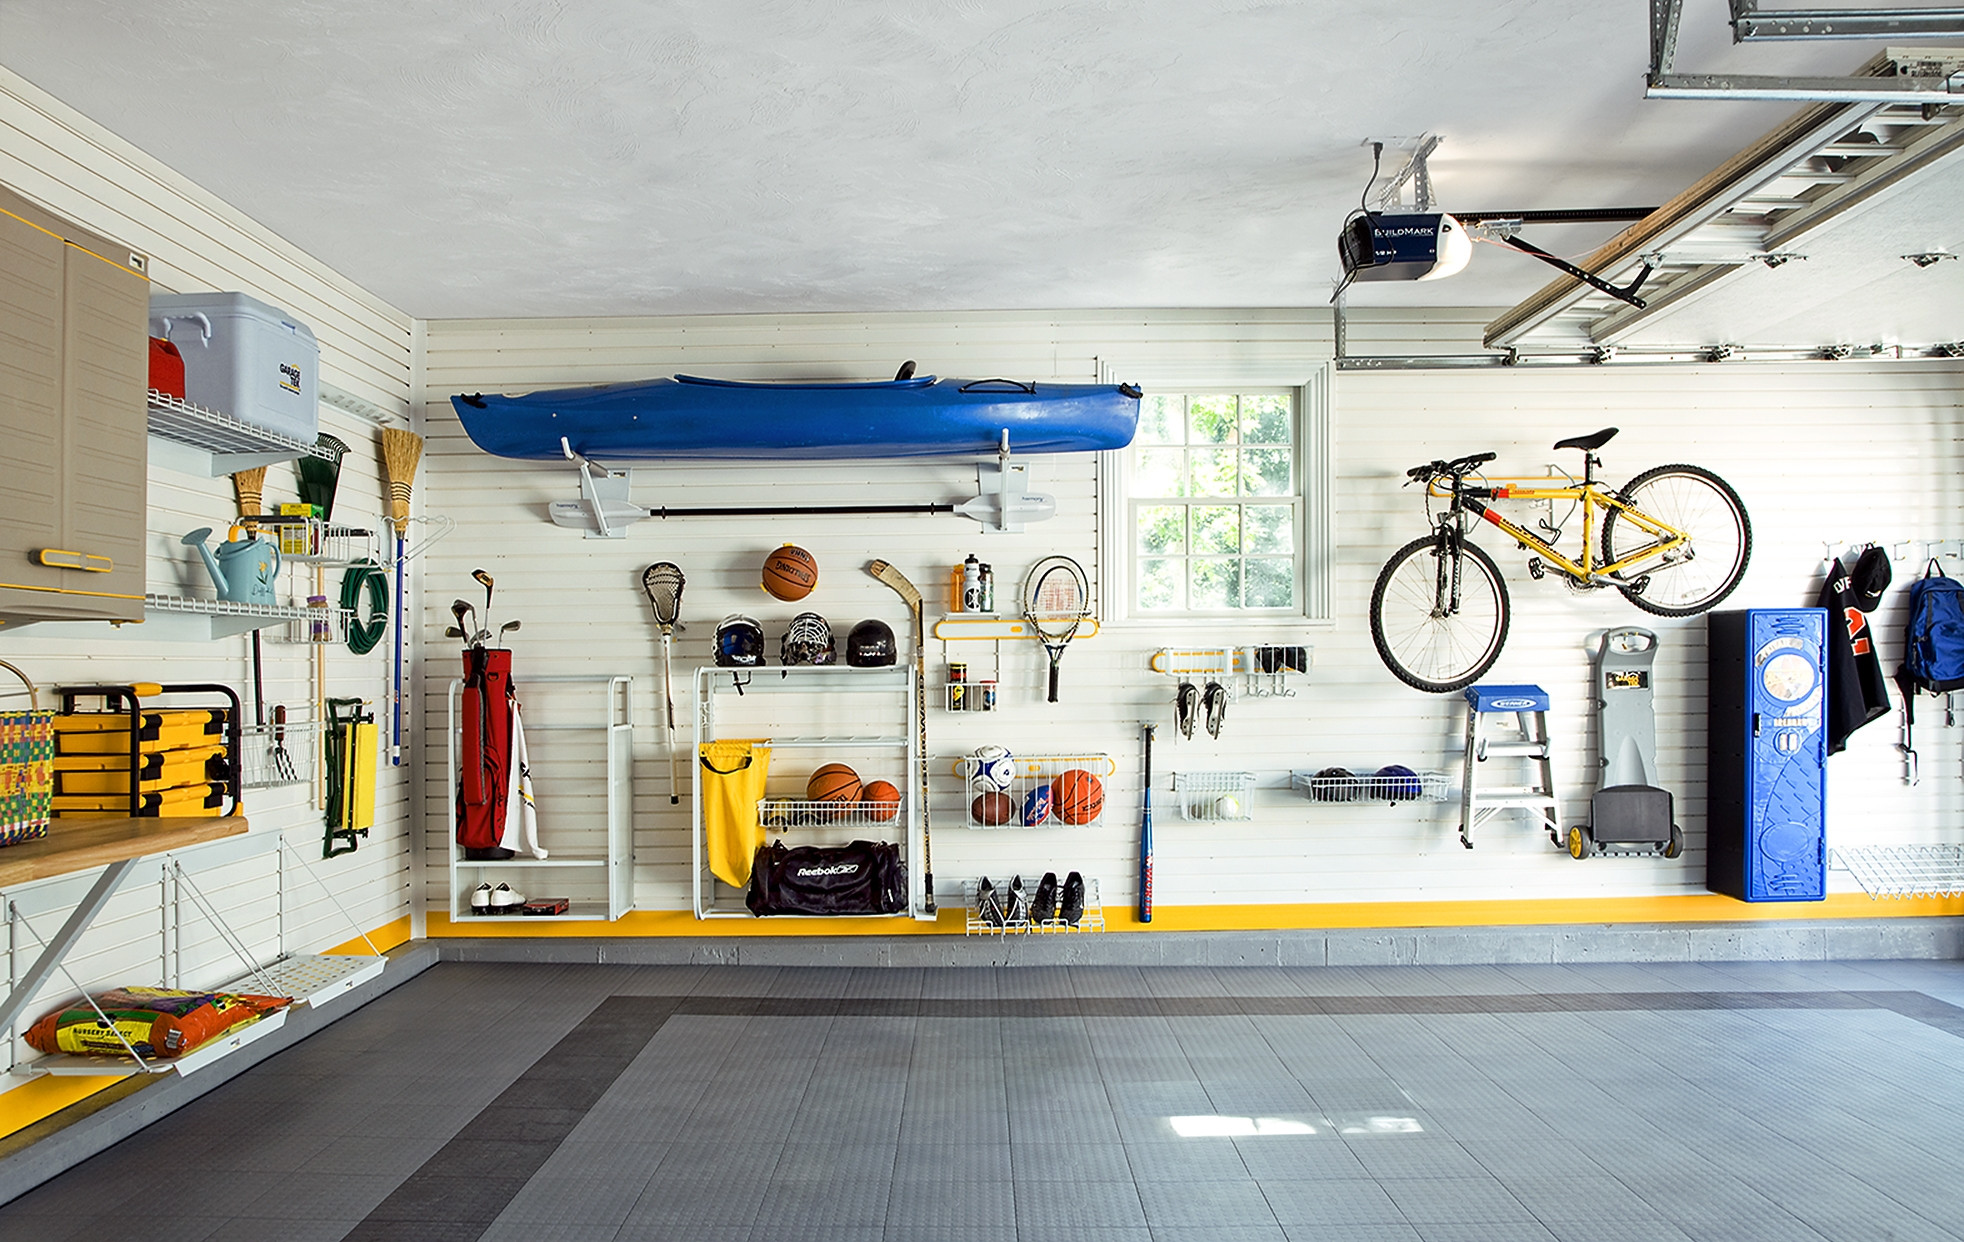 Ideas For Organizing Garage
 Read This Before You Organize Your Garage